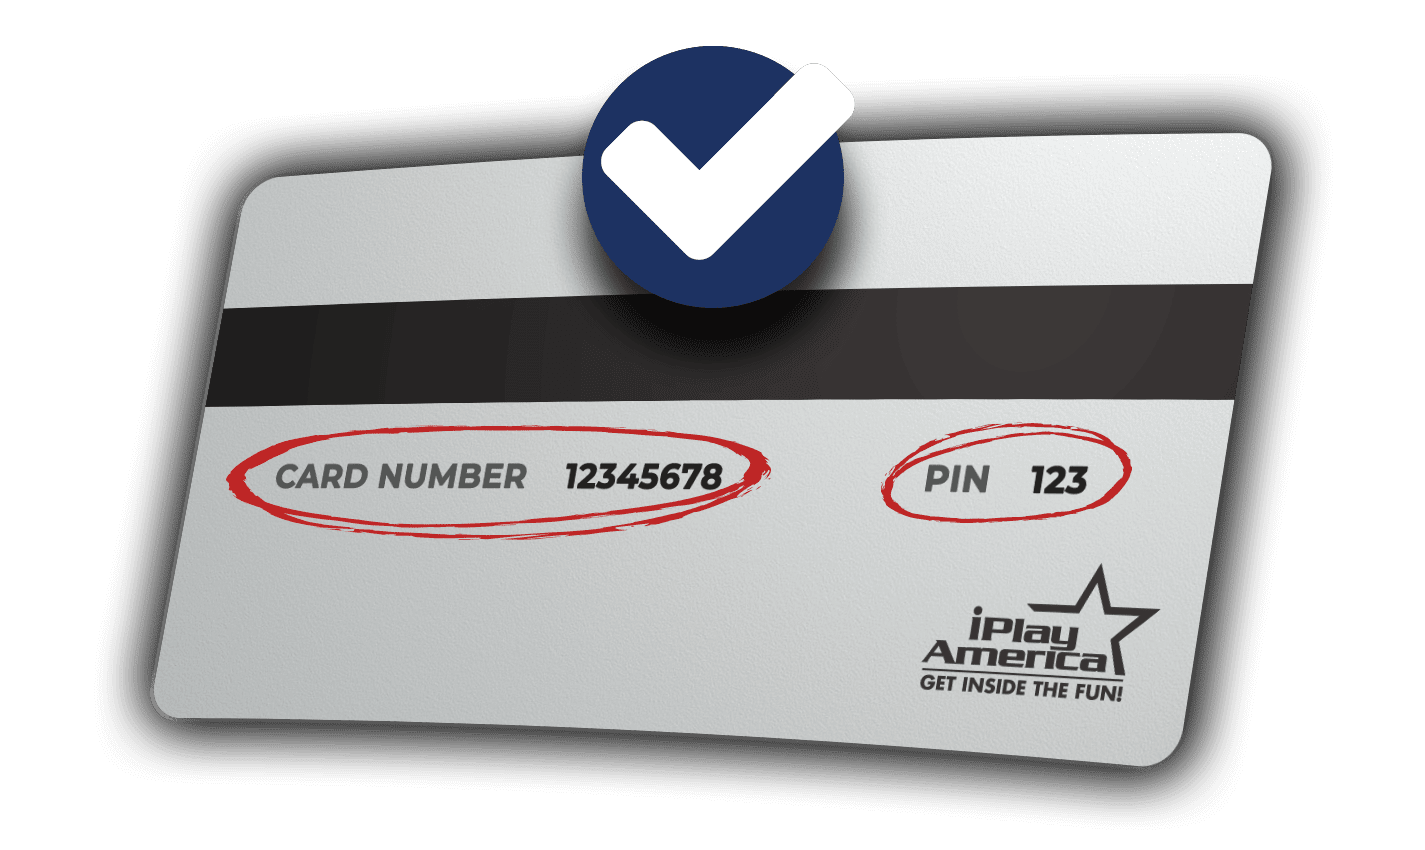 Use your card and pin number to see your balance